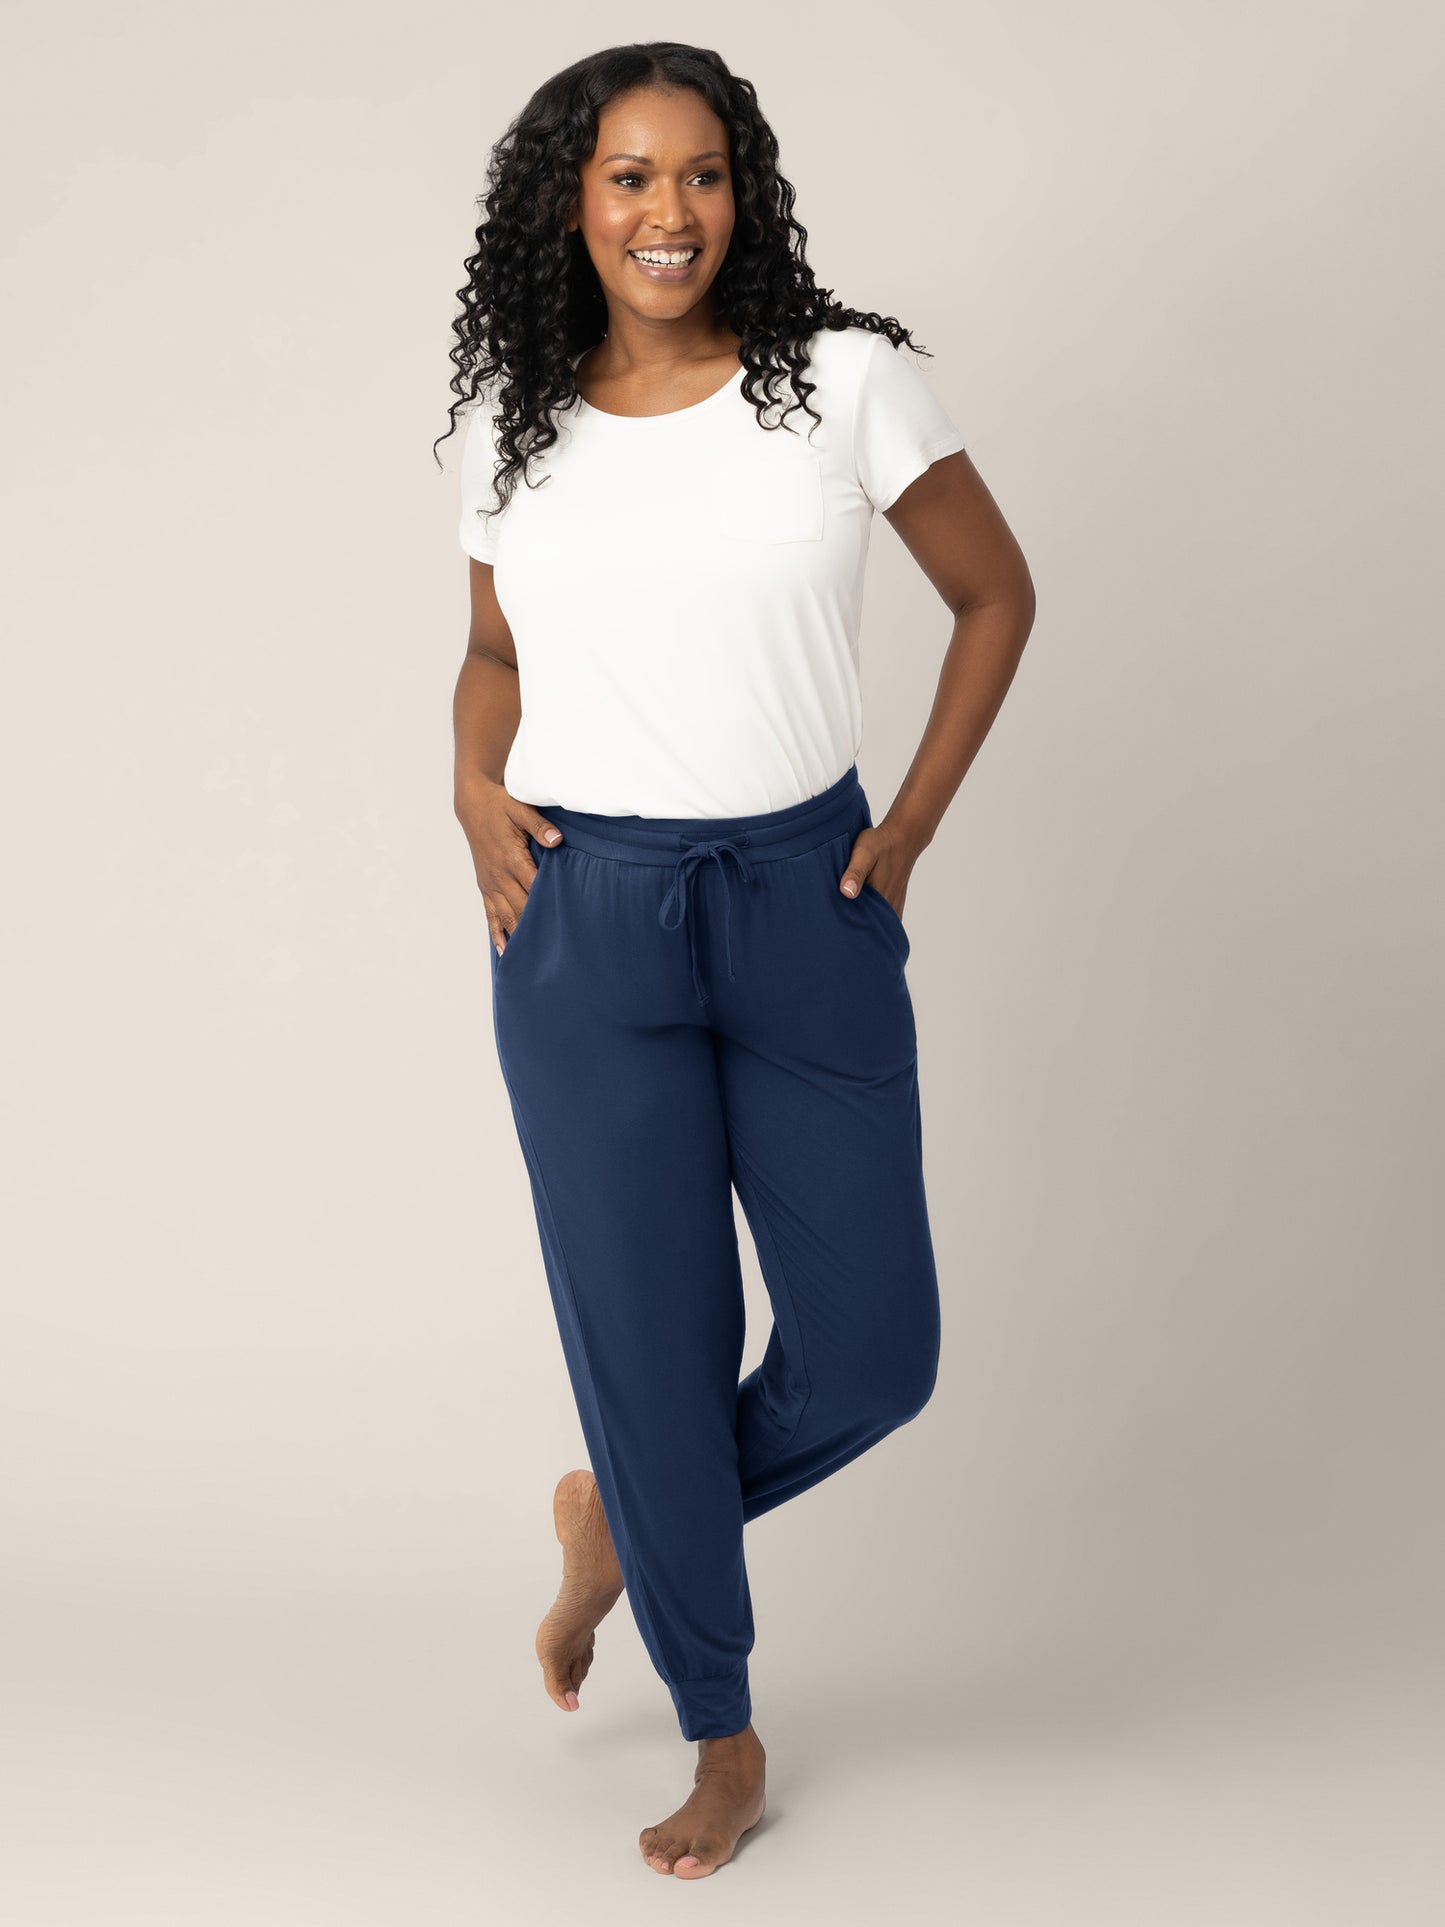 Full body picture of a model wearing the Everyday Lounge Jogger.